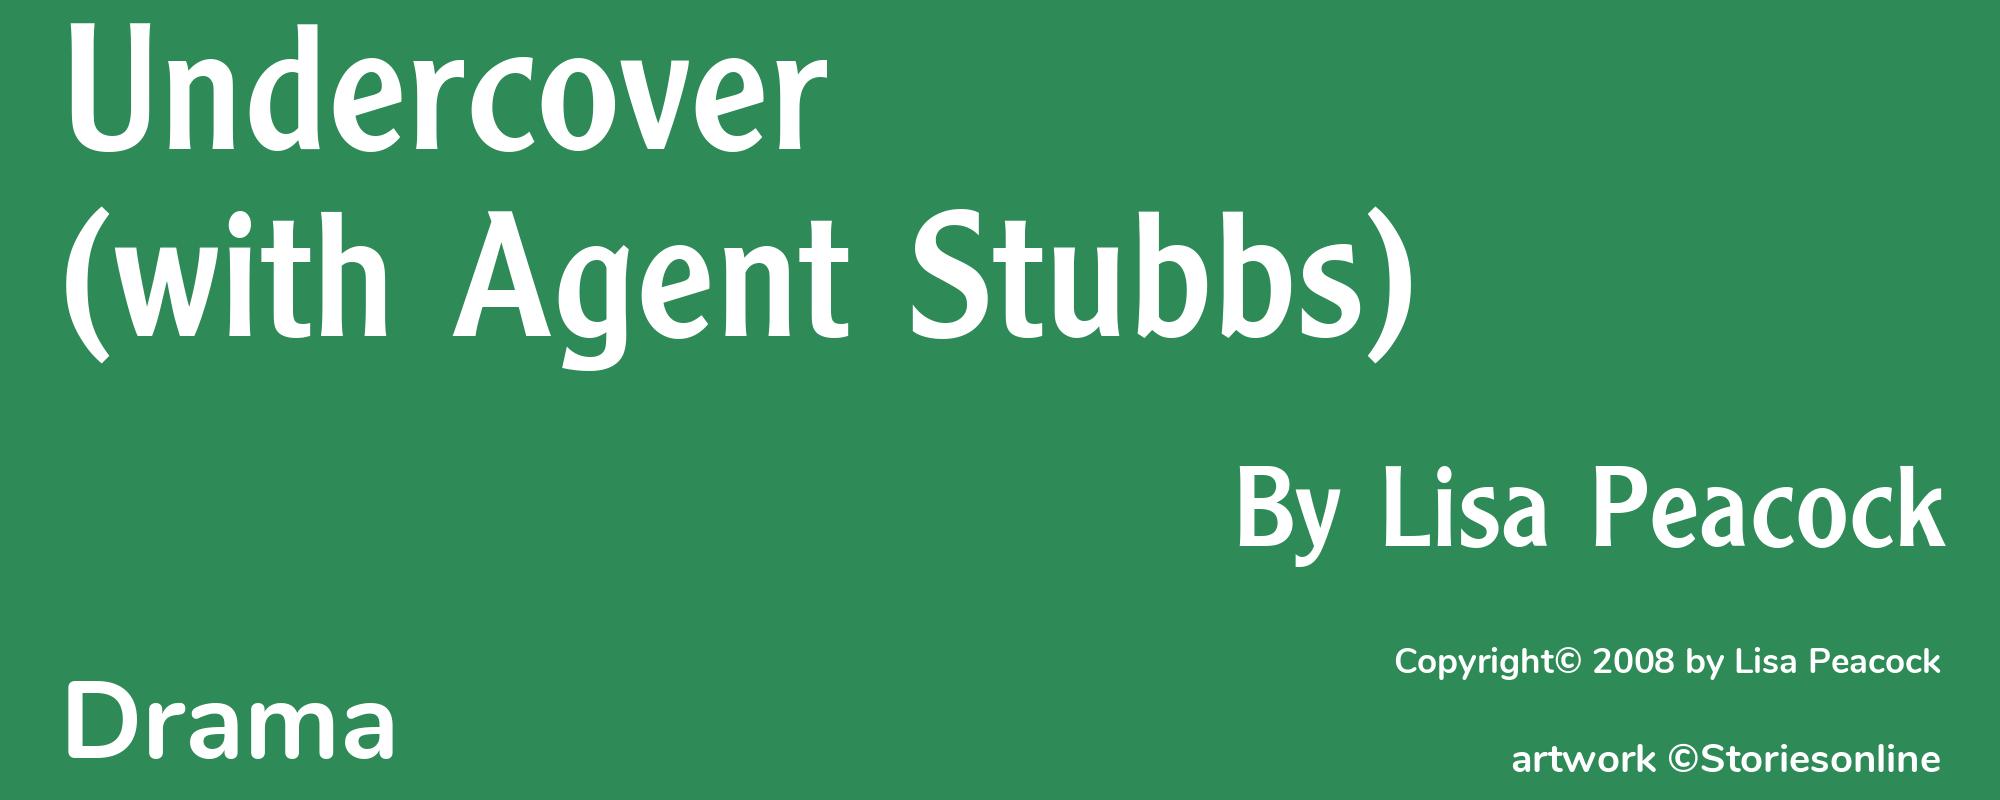 Undercover (with Agent Stubbs) - Cover